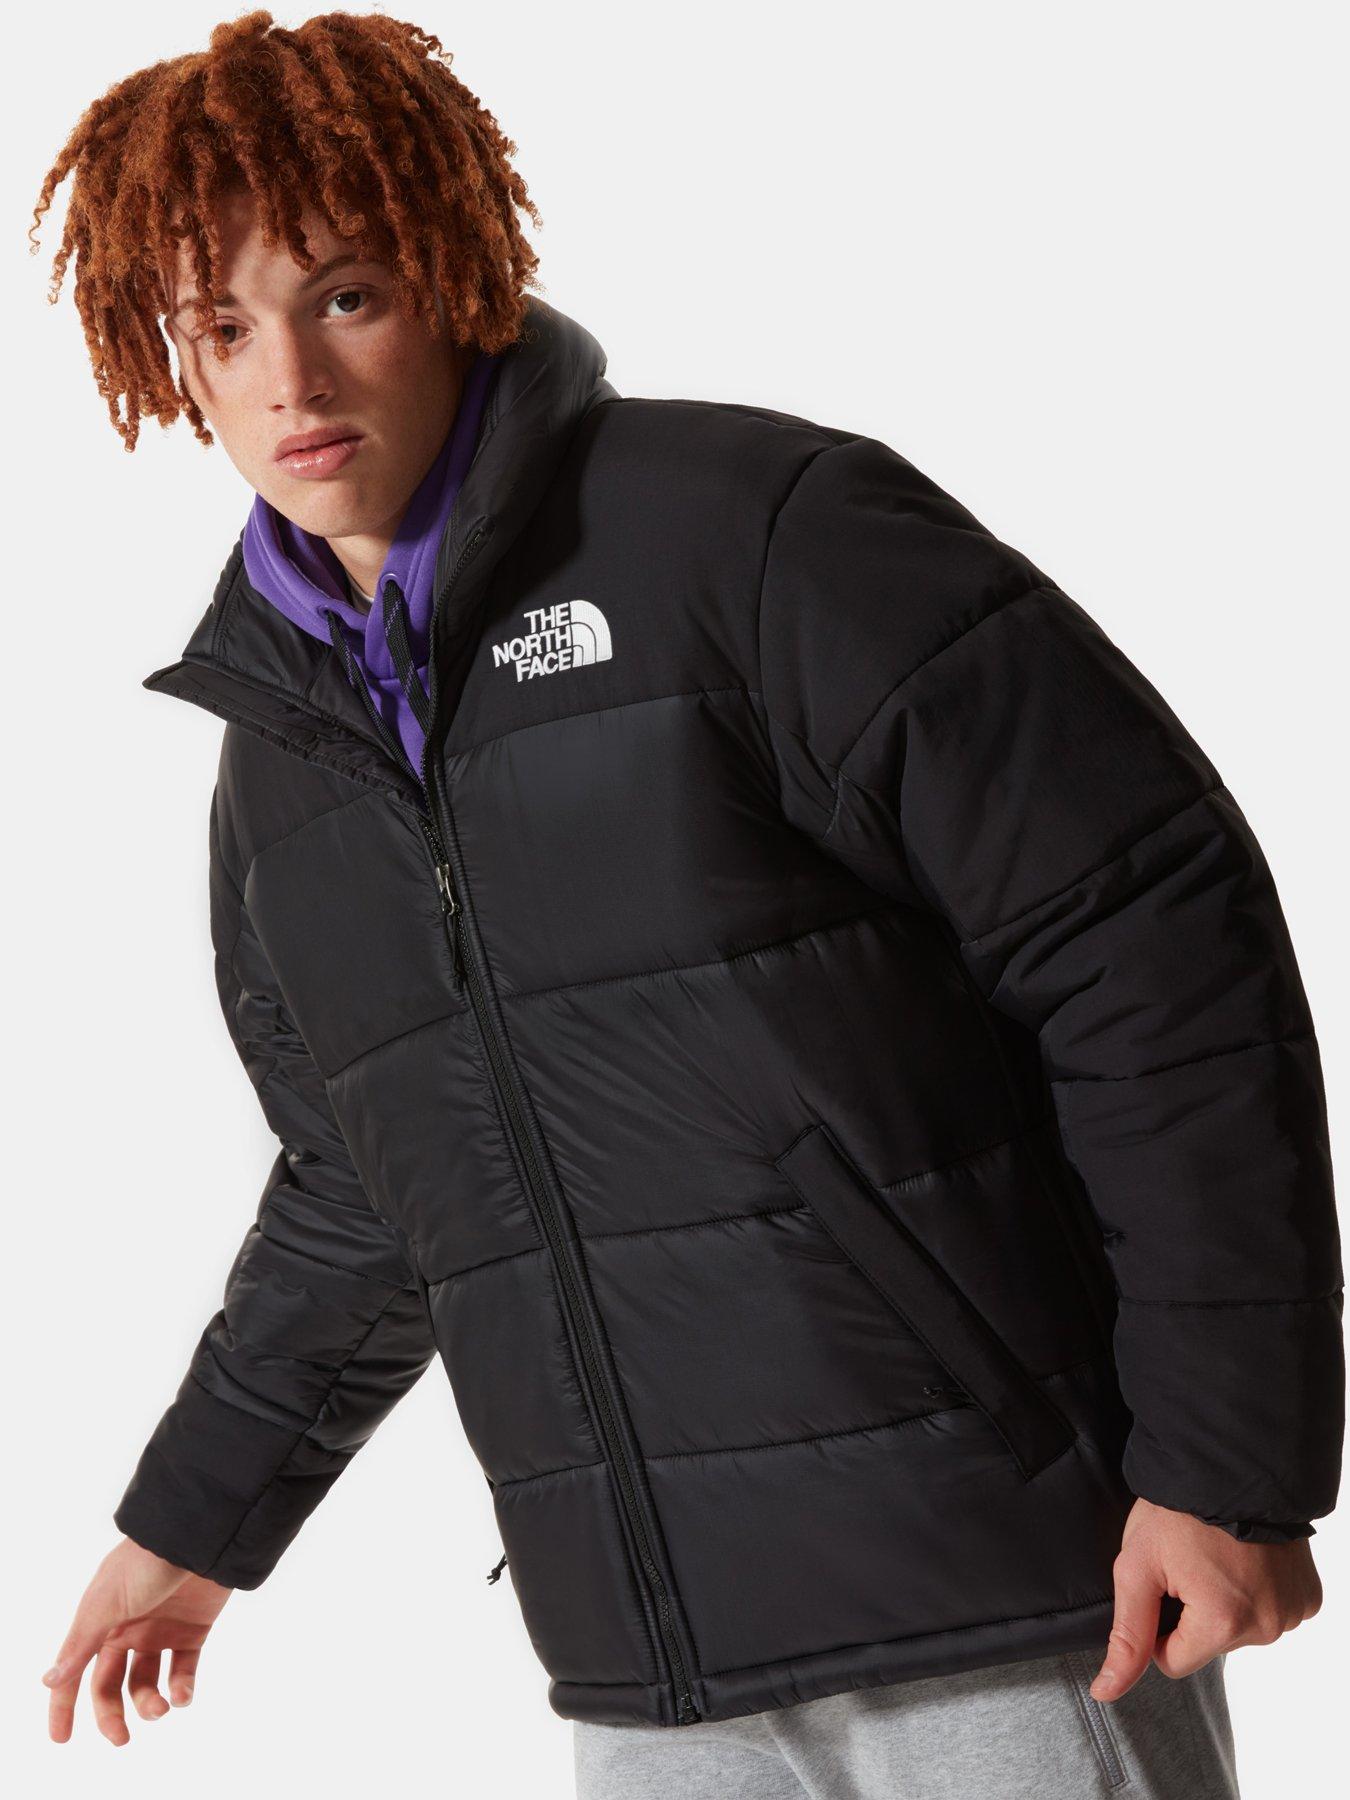 XXL | The north face | Coats & jackets | Men | www.very.co.uk